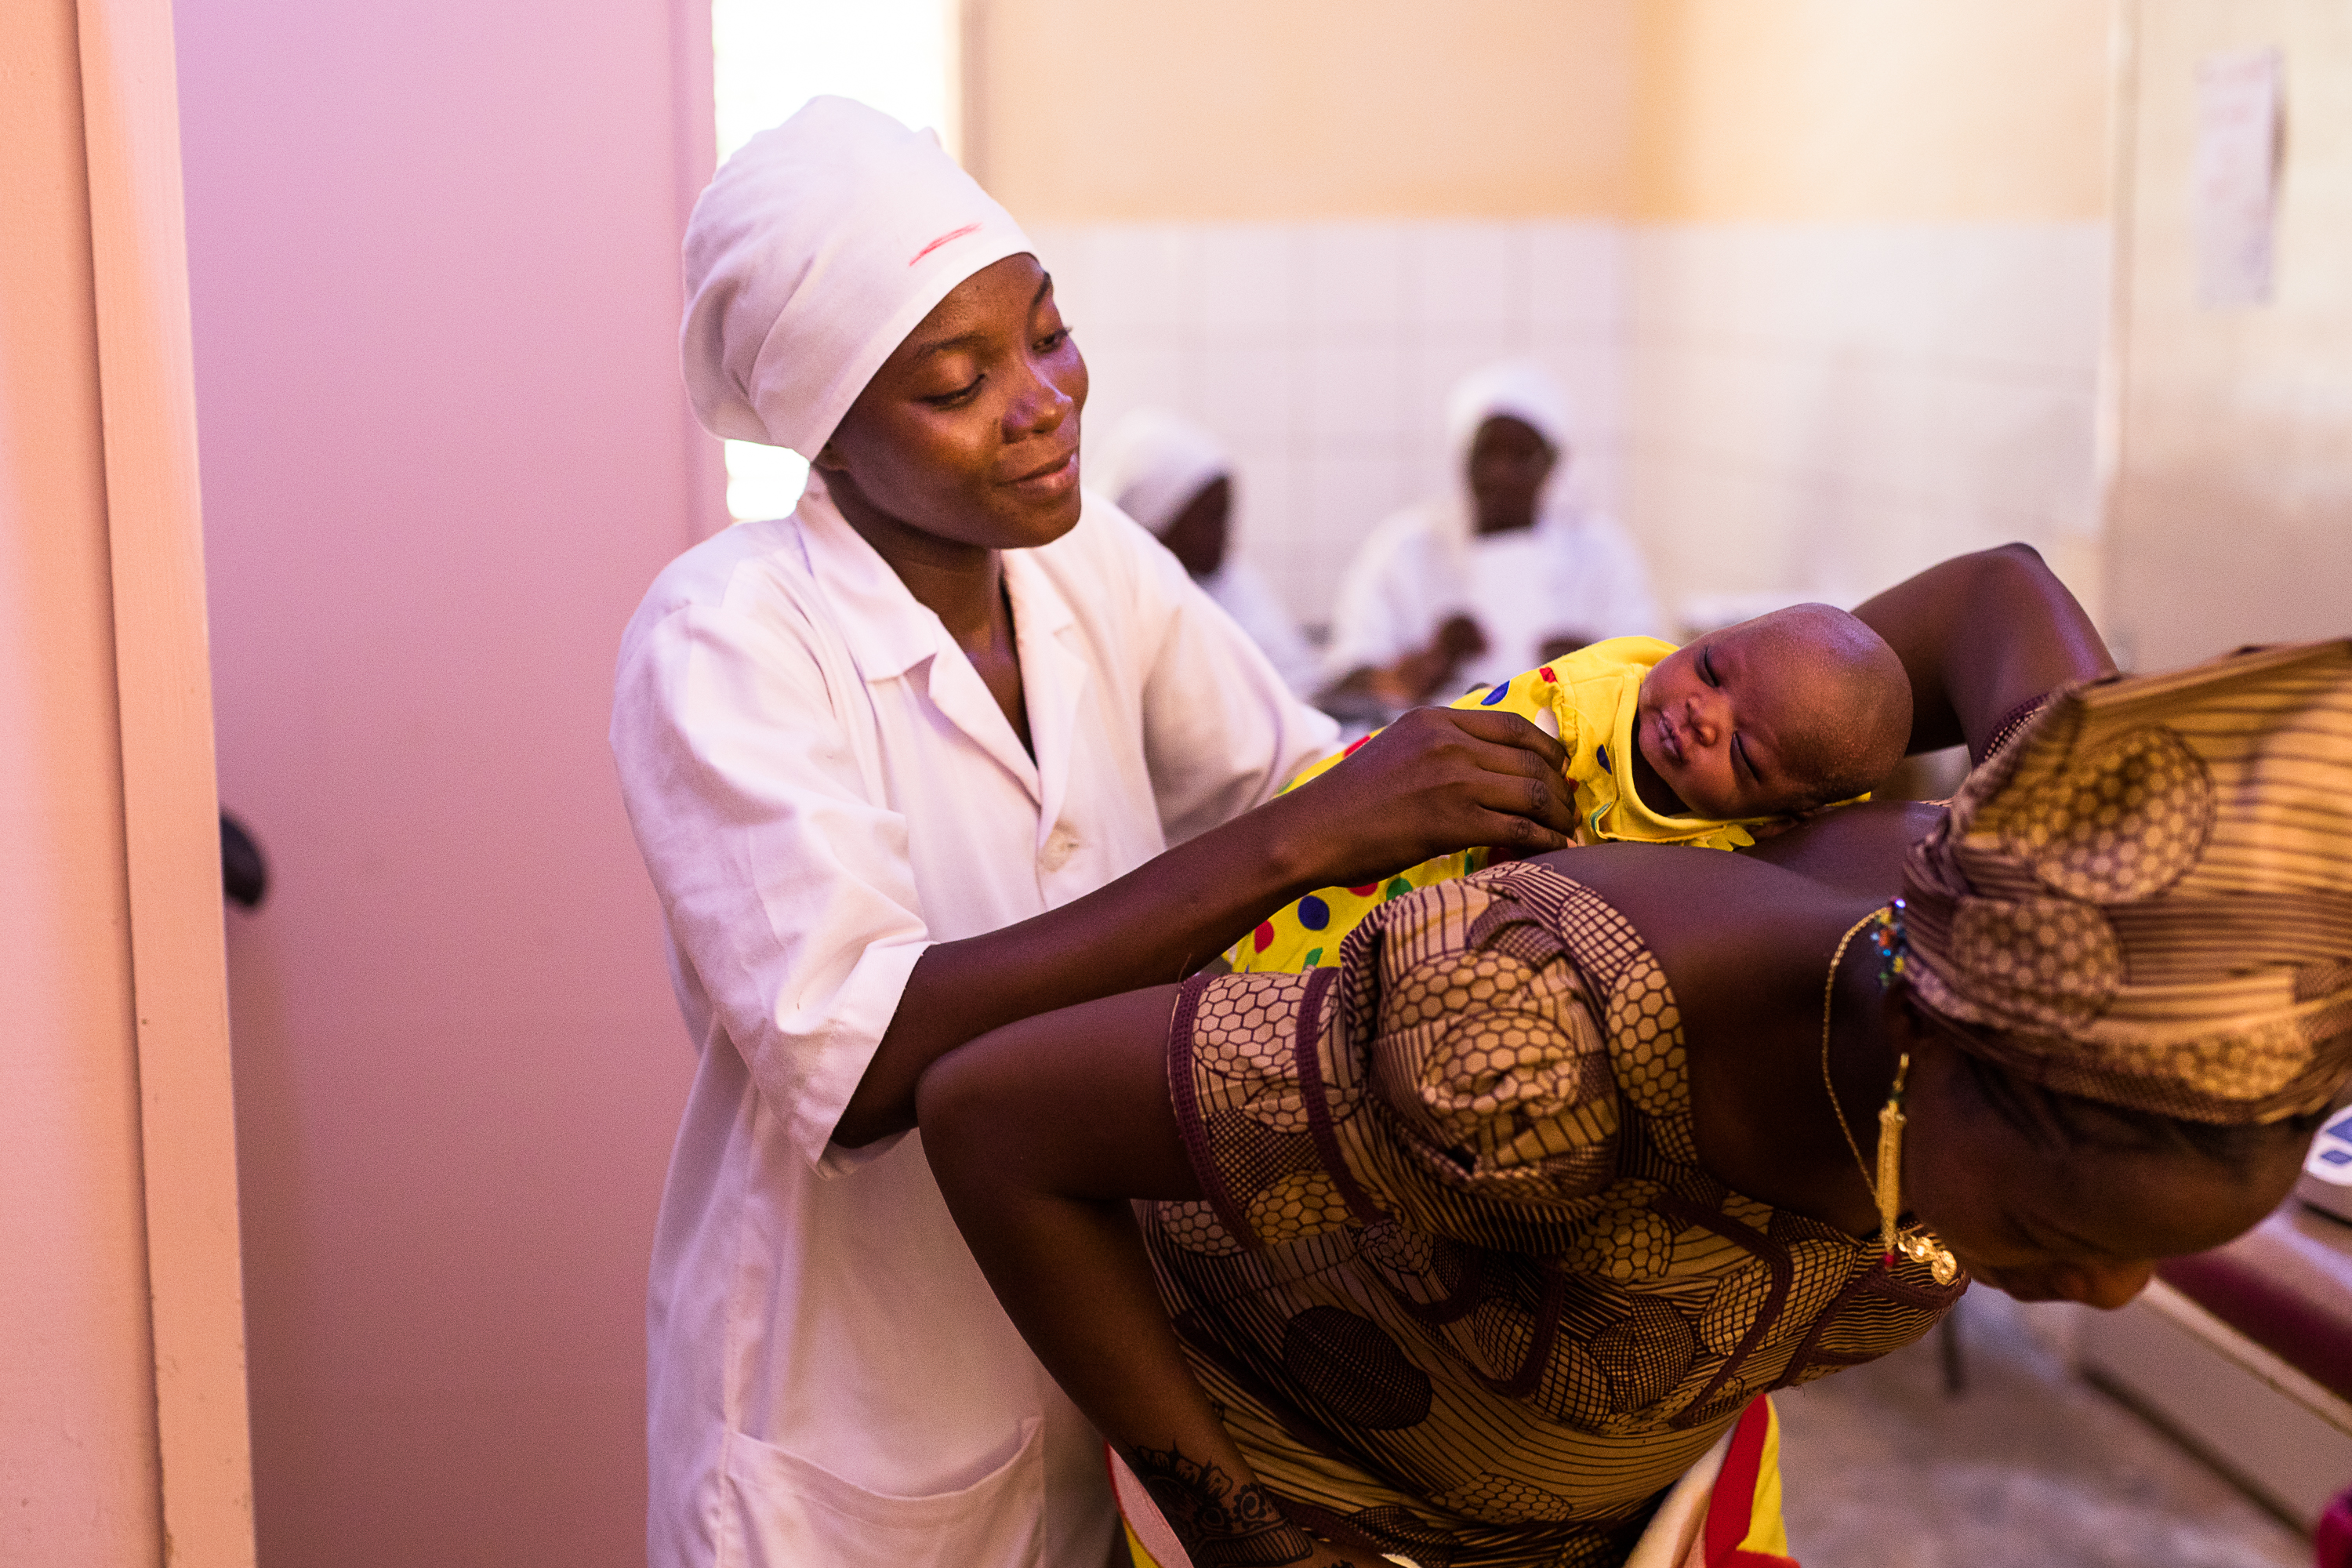 A health worker helps a mother and her baby at a health facility in Ouagadougou in 2017. Photo by Trevor Snapp for IntraHealth International.